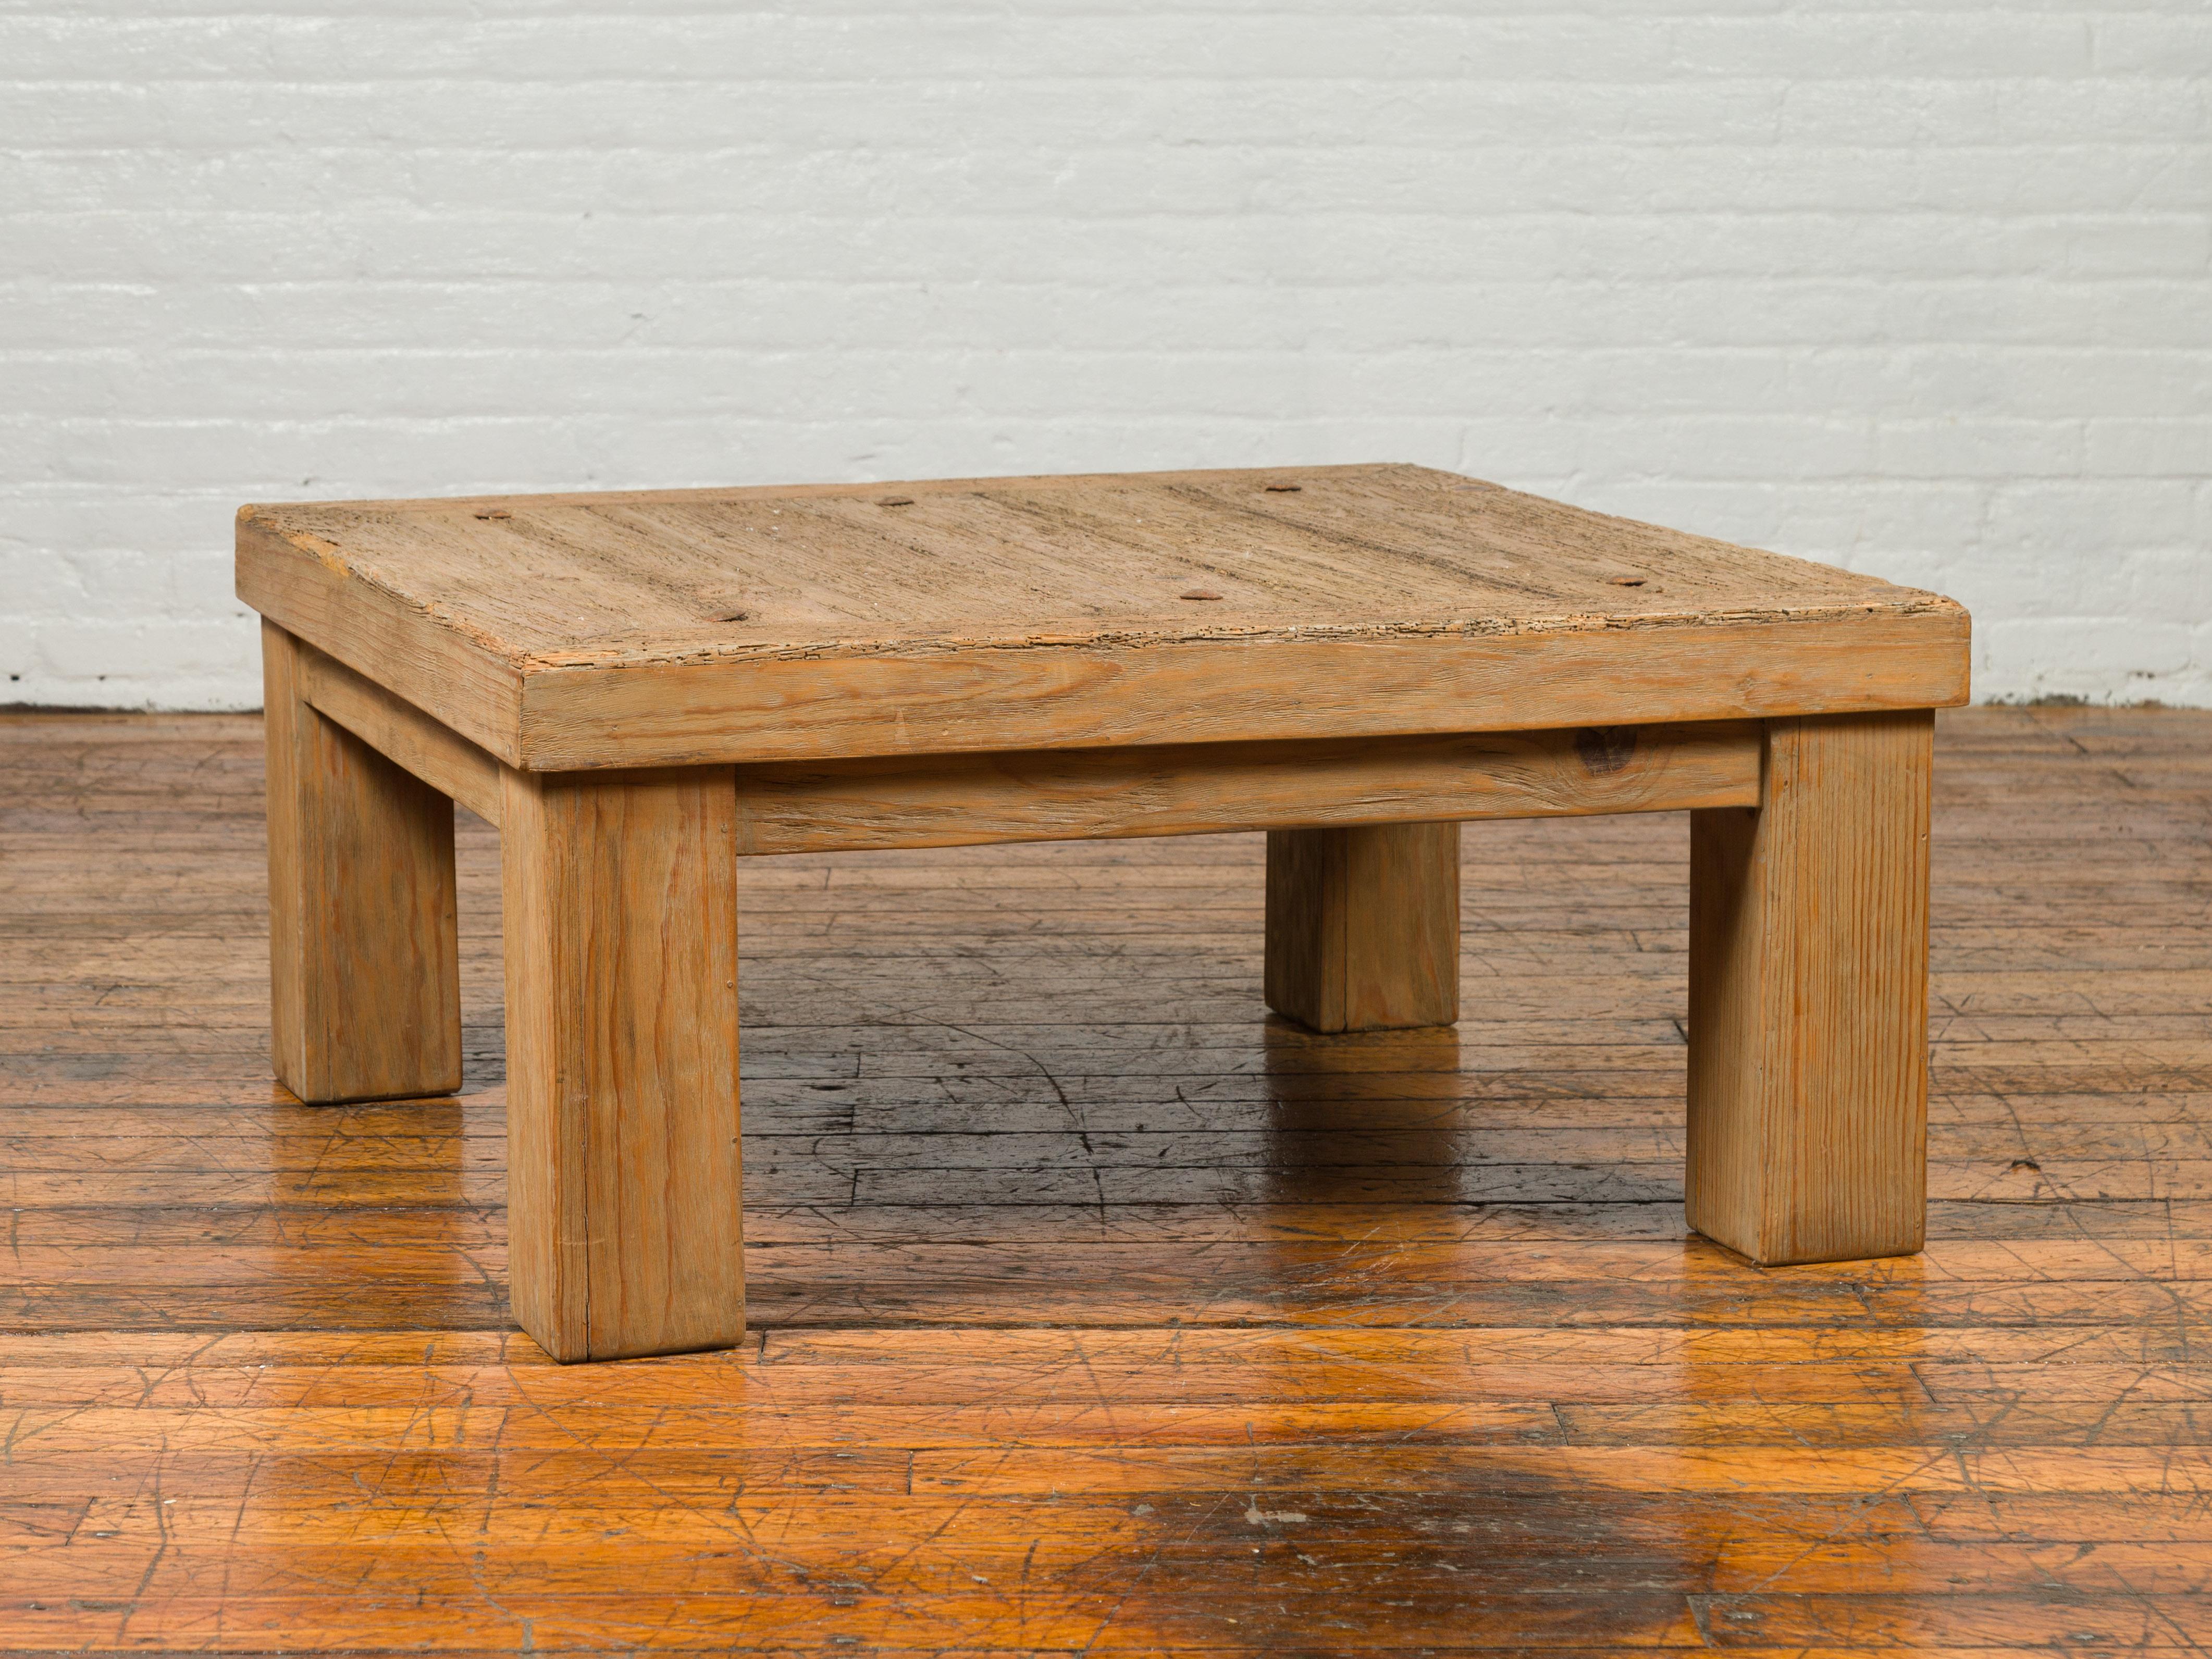 Vintage Driftwood Midcentury Coffee Table from Mexico with Square Legs 2